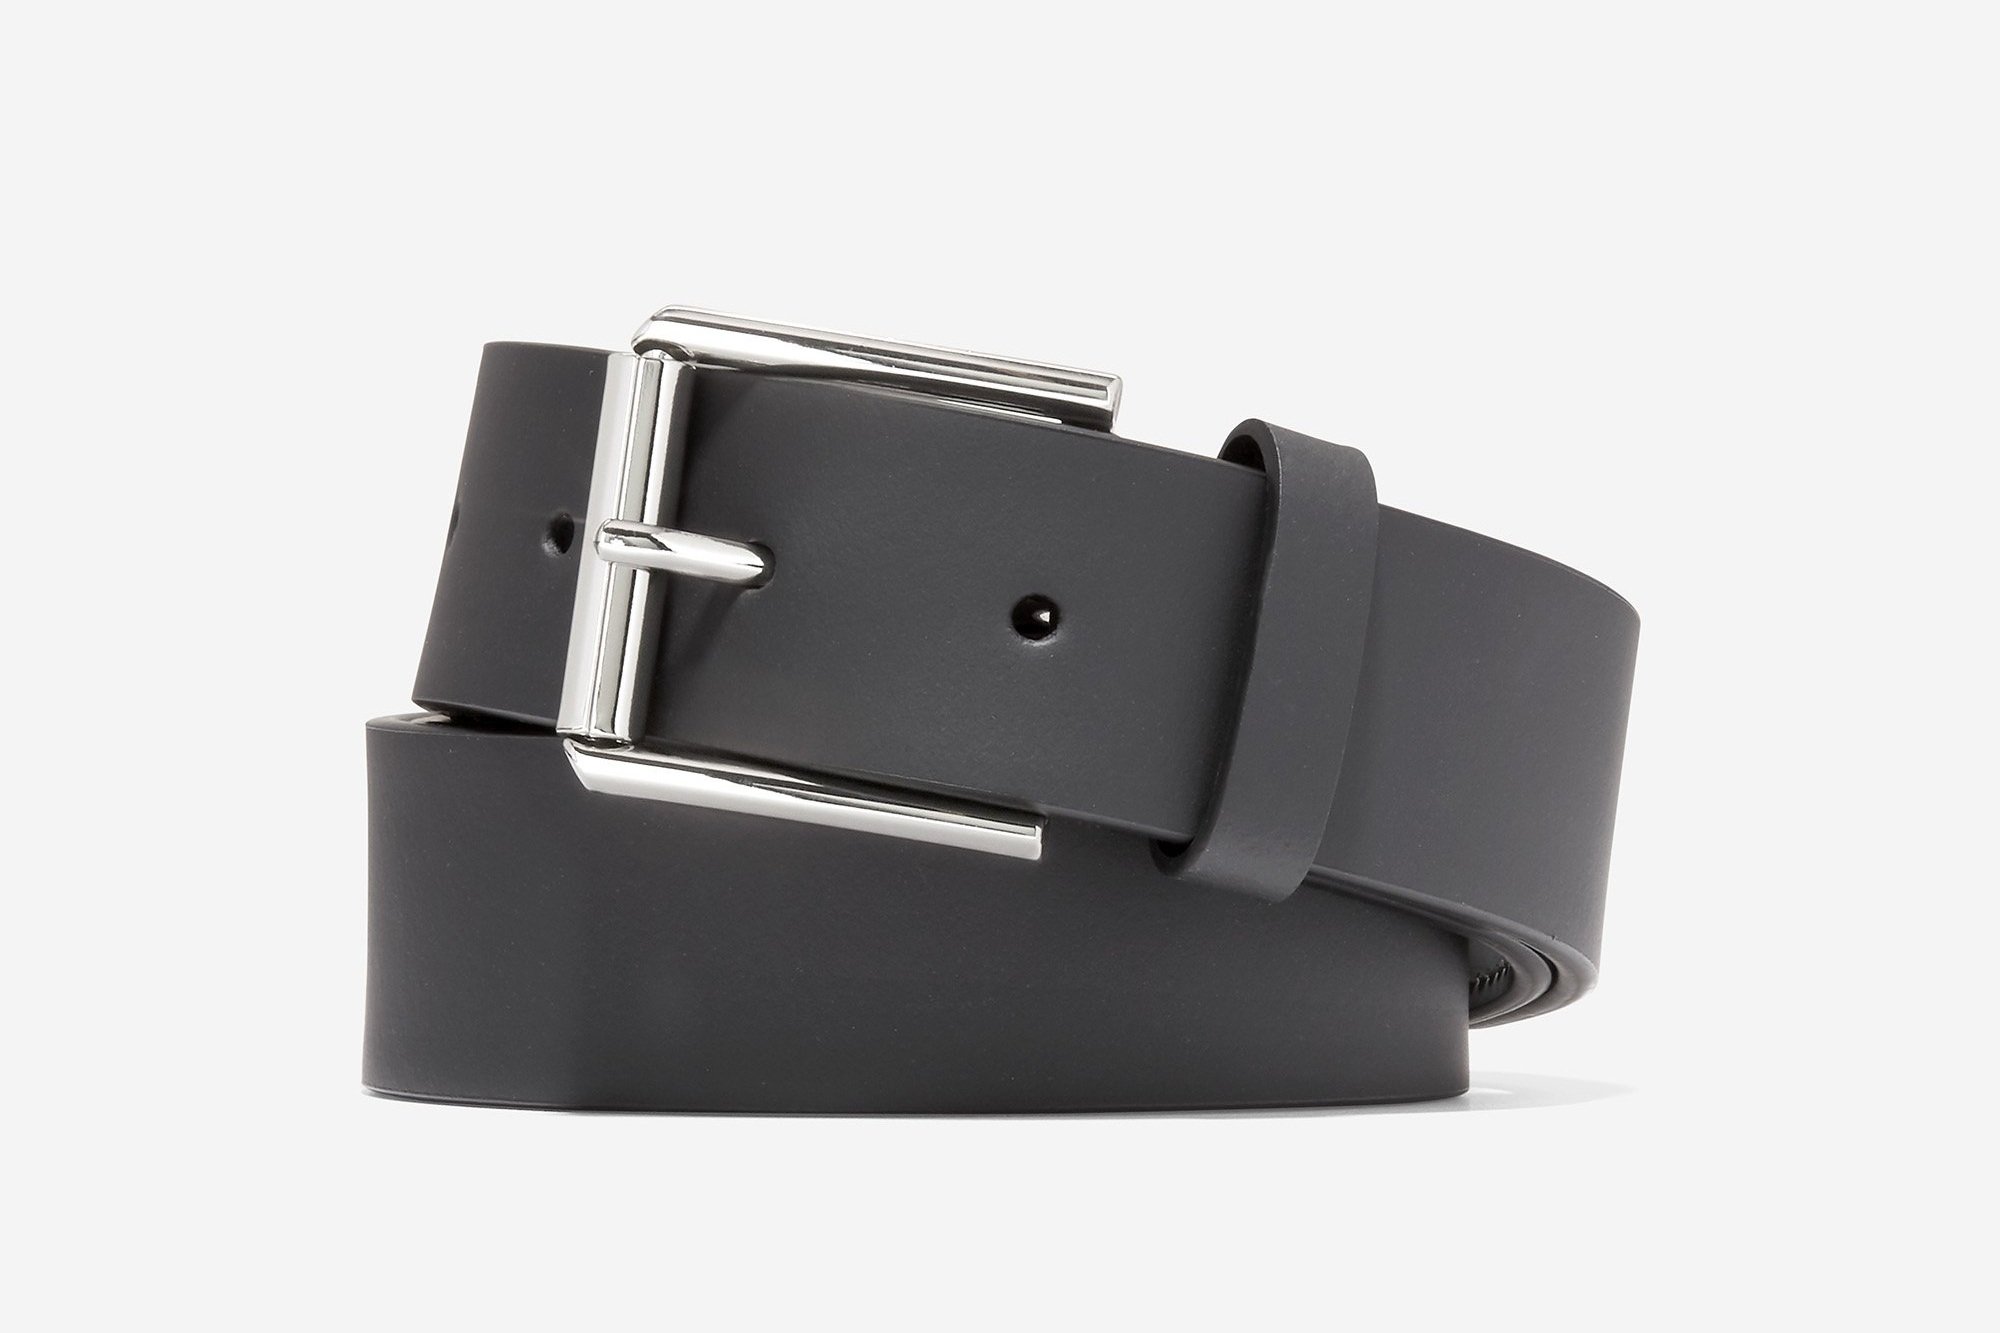 Top 30 All-Time Best Men’s Fashion Belts on the Market Right Now ...